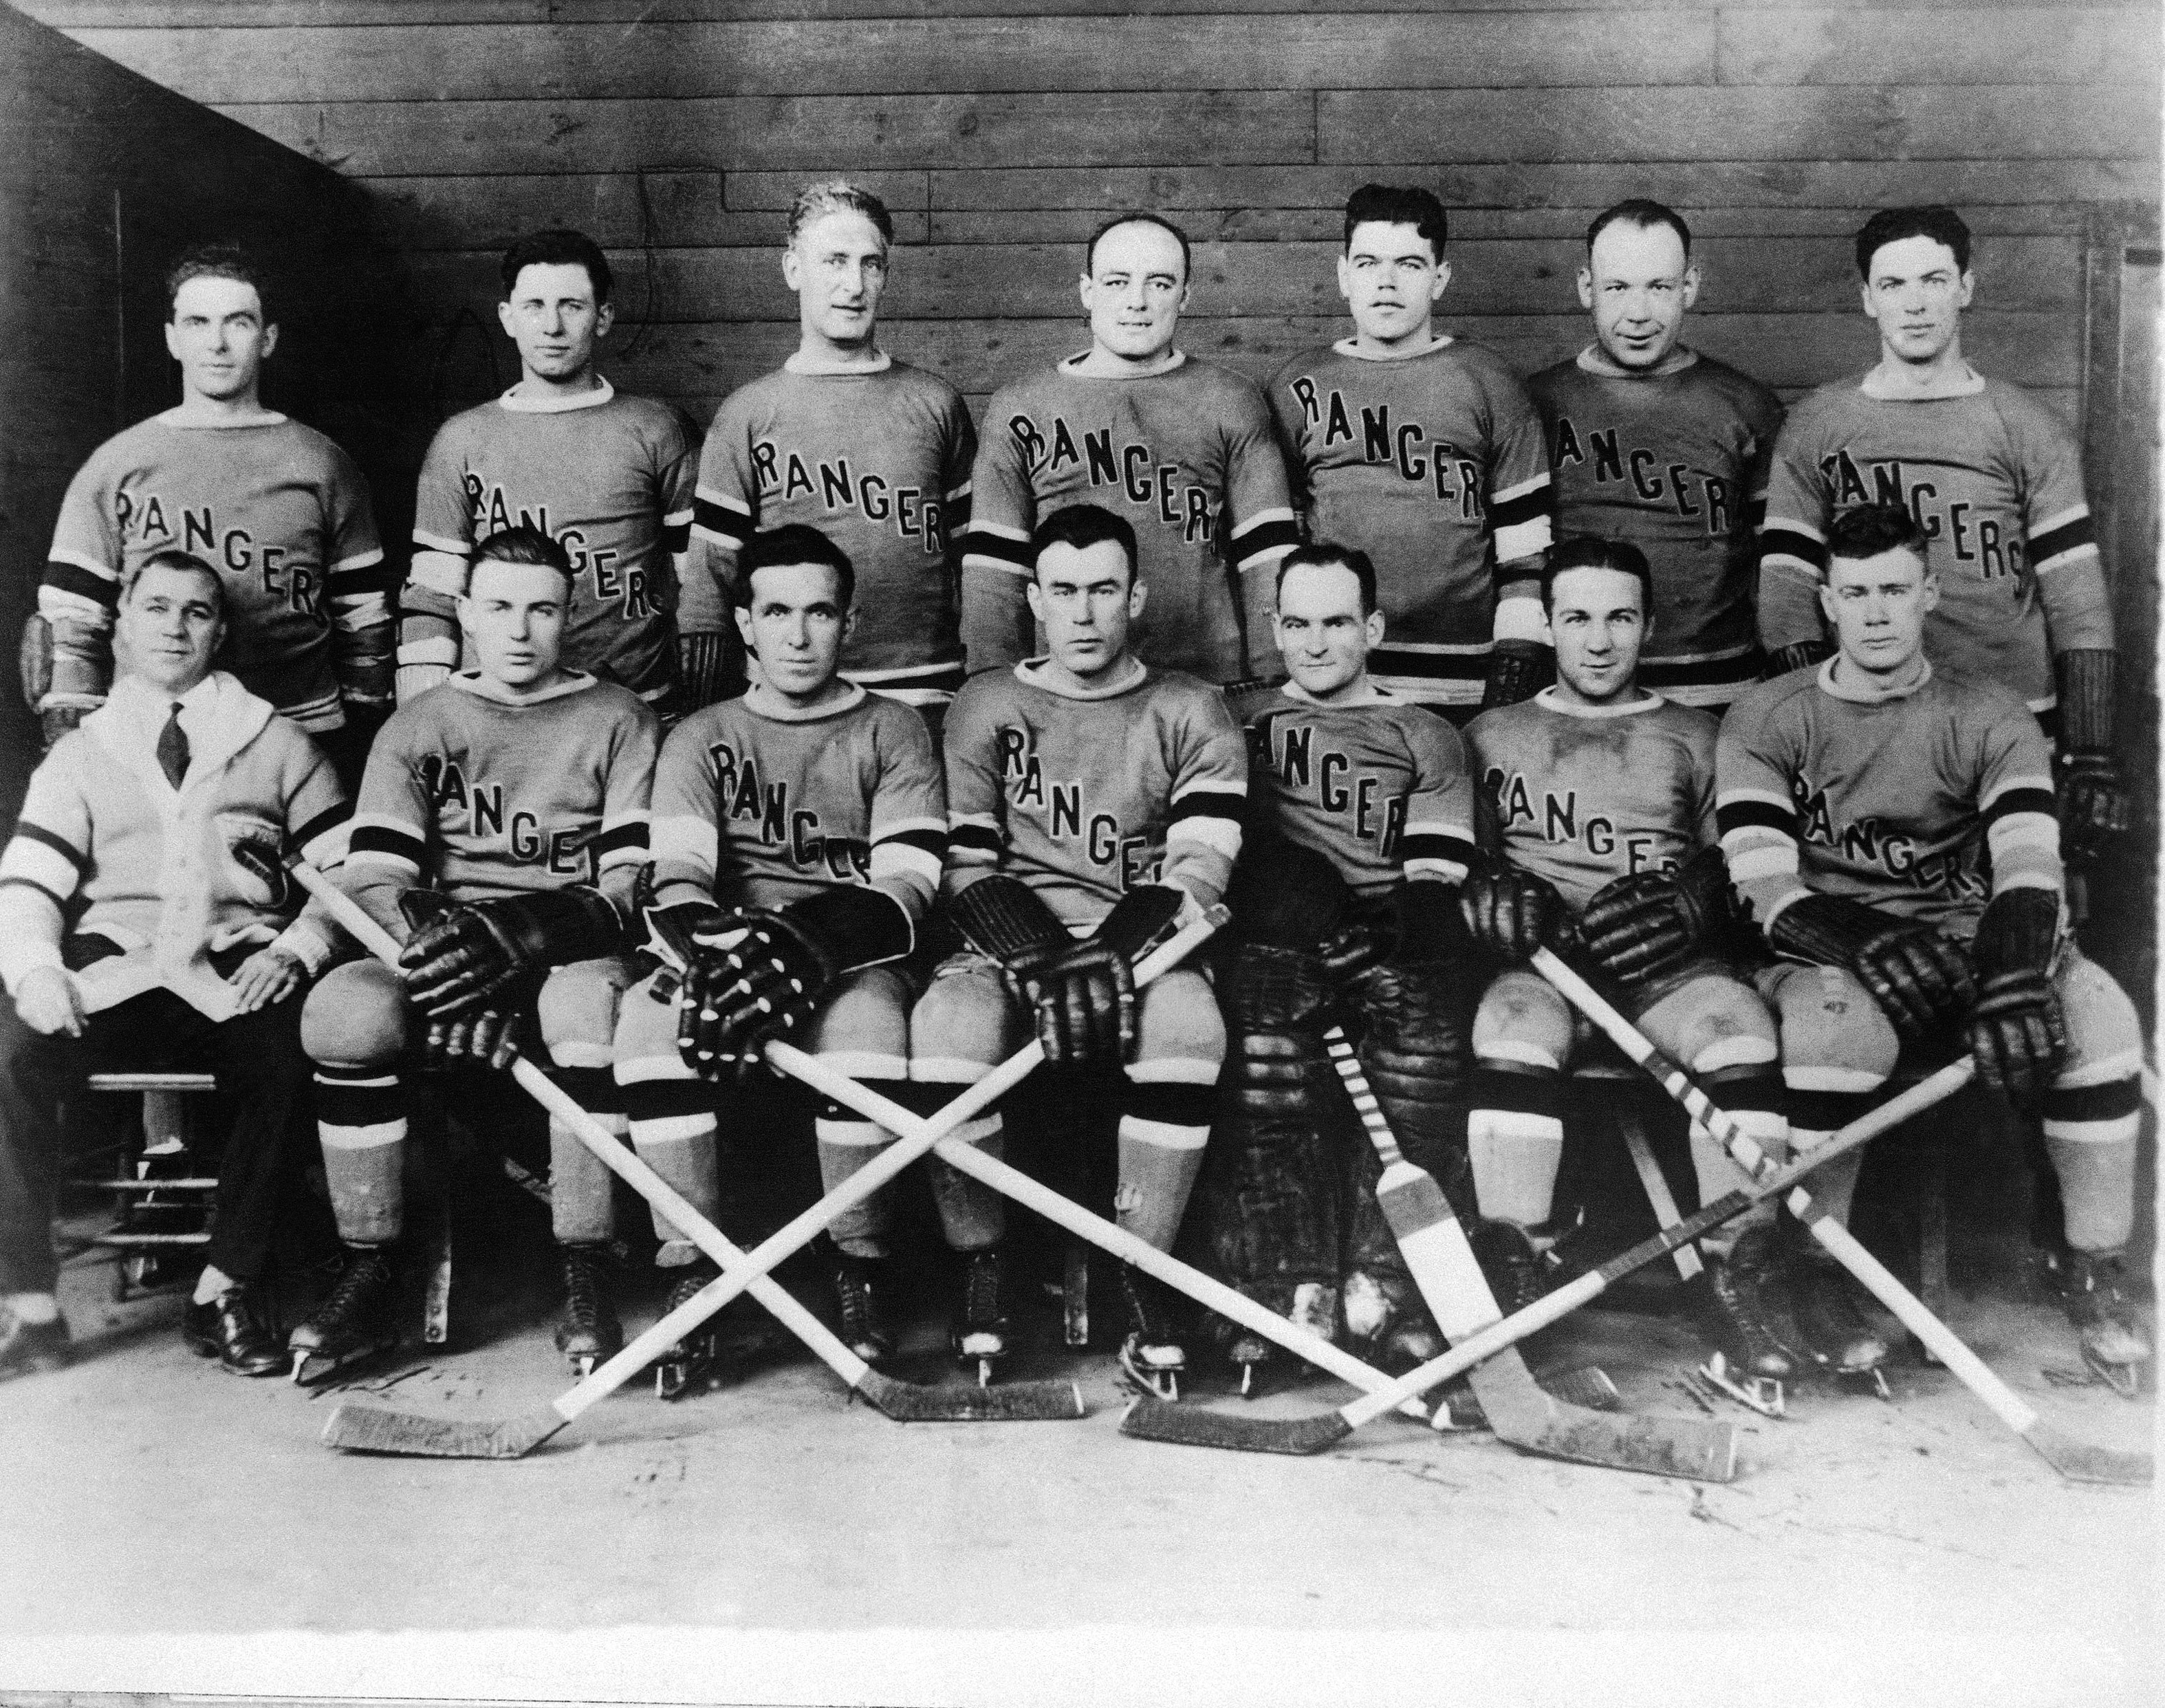 The New York Rangers, members of the National Hockey League, are working hard in preparation for the opening of the hockey season. They will make their first home appearance in New York Nov. 18, 1928. Left to right top row, Billy Boyd, Butch Keeling, manager Lester Patrick, Ching Johnson, Myles Lane, Taffy Abel, Paul Thompson. Bottom Row--Trainer Harry Westerby, Murray Murdock, Frank Boucher, Bill Cook, John Ross, Leo Bourgault, and Bunny Cook. (AP Photo)